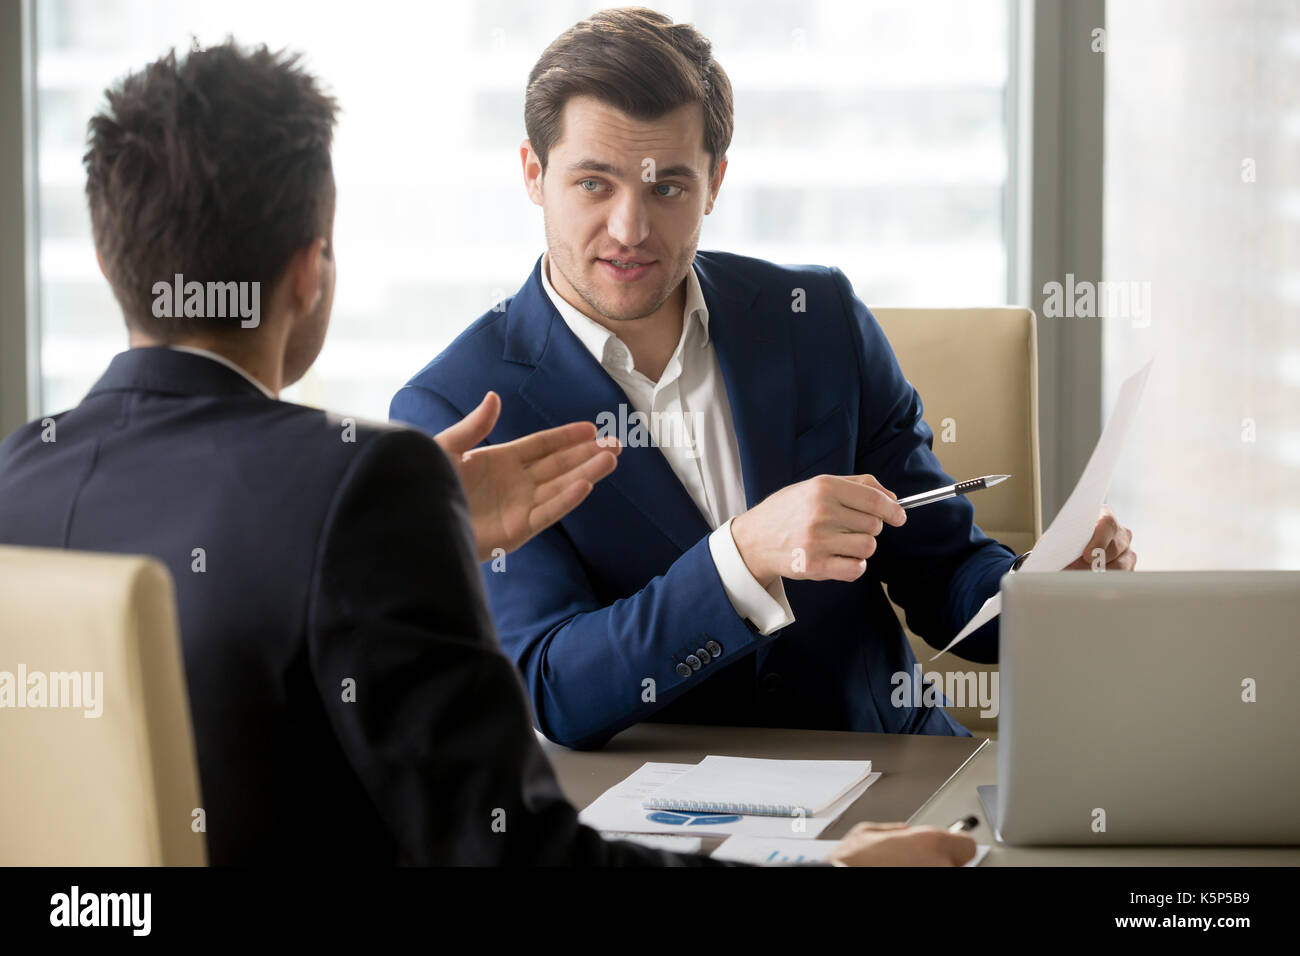 CEO discussing financial strategy with partner Stock Photo